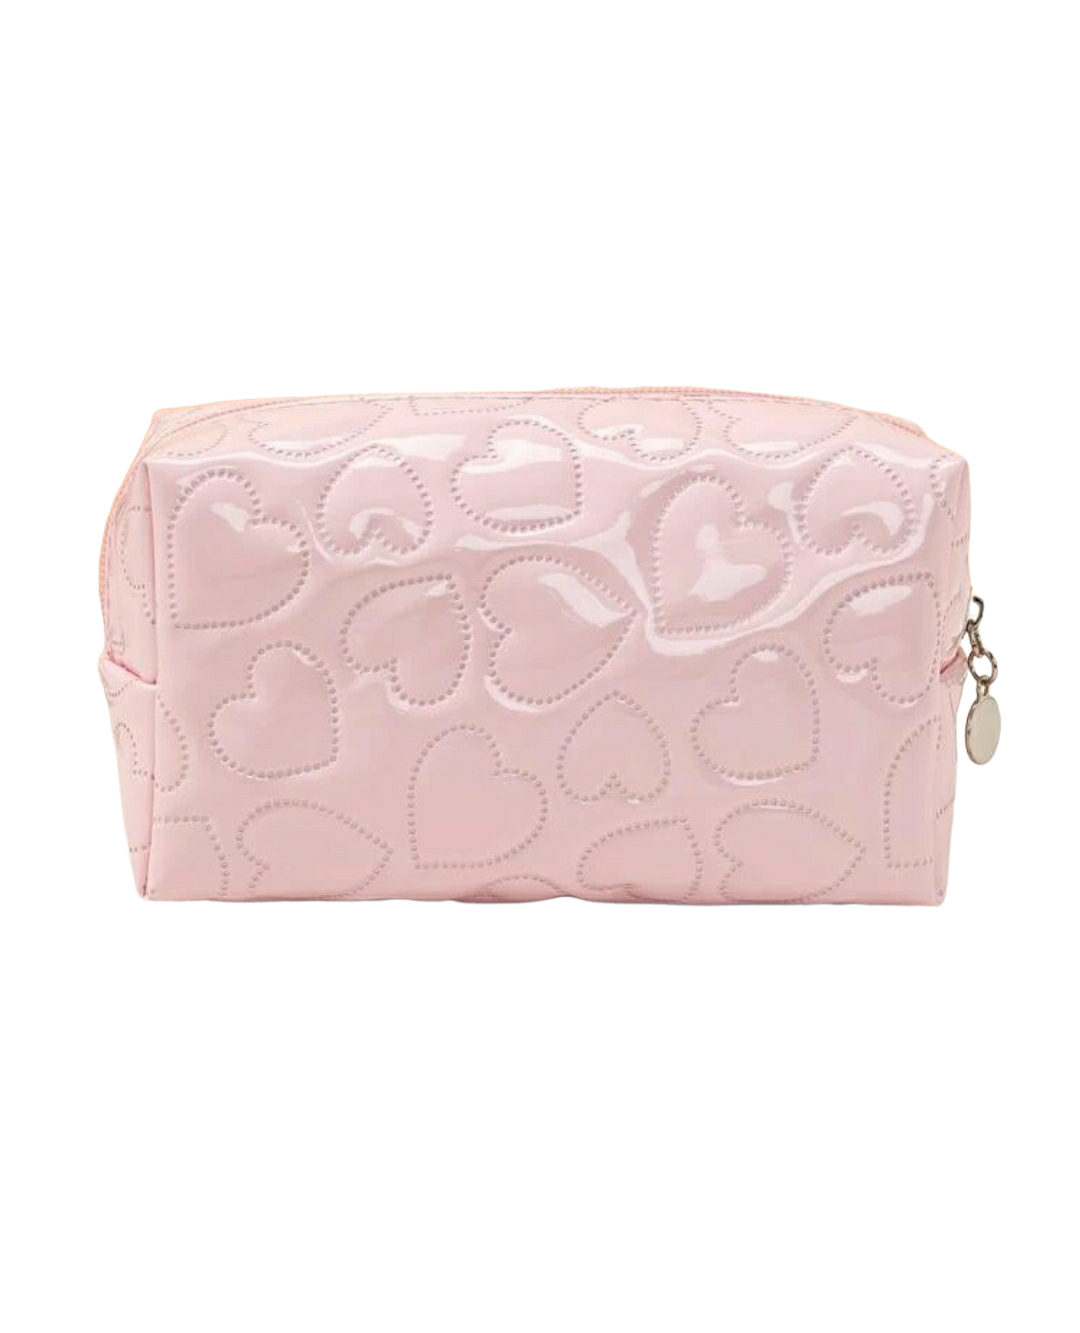 Pink Heart Quilted Makeup Bag